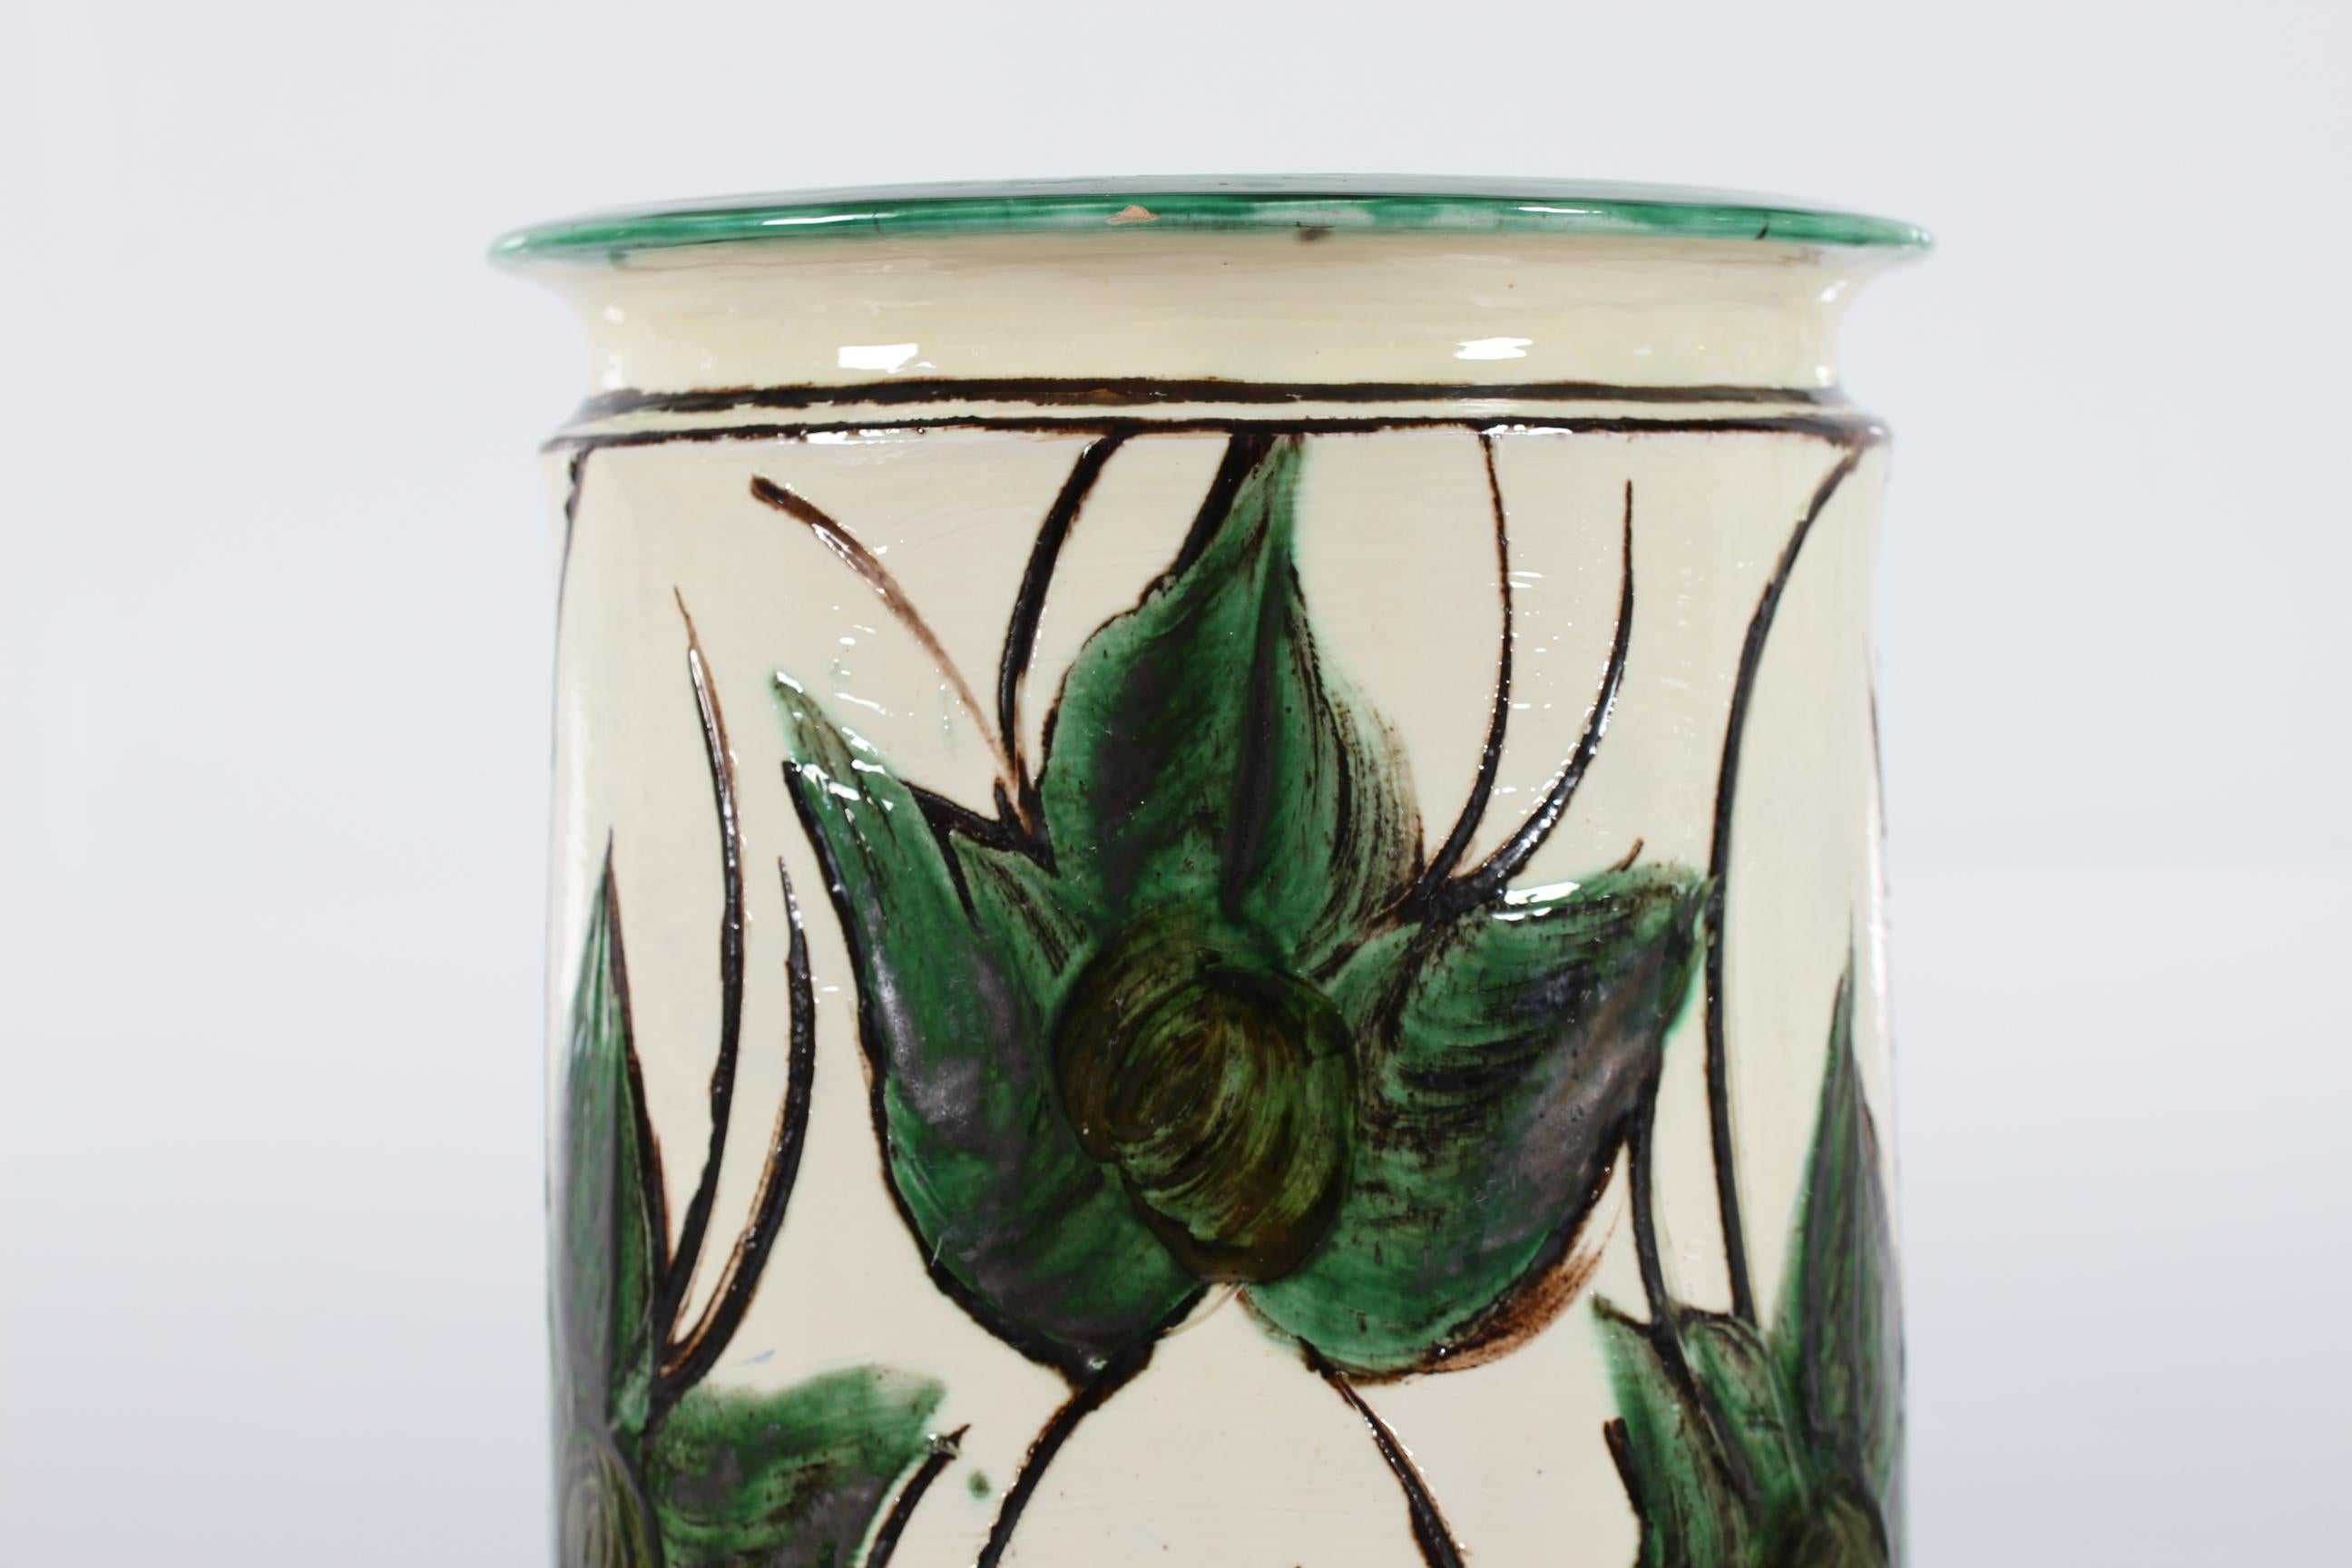 Huge and beautiful Danish ceramic floor vase made by Herman A. Kähler in the early 20th century (1915-1925).
The floor vase has a sand colored basecoat and a decoration with large green leaves.
The decoration is attributed to the painters Sofie